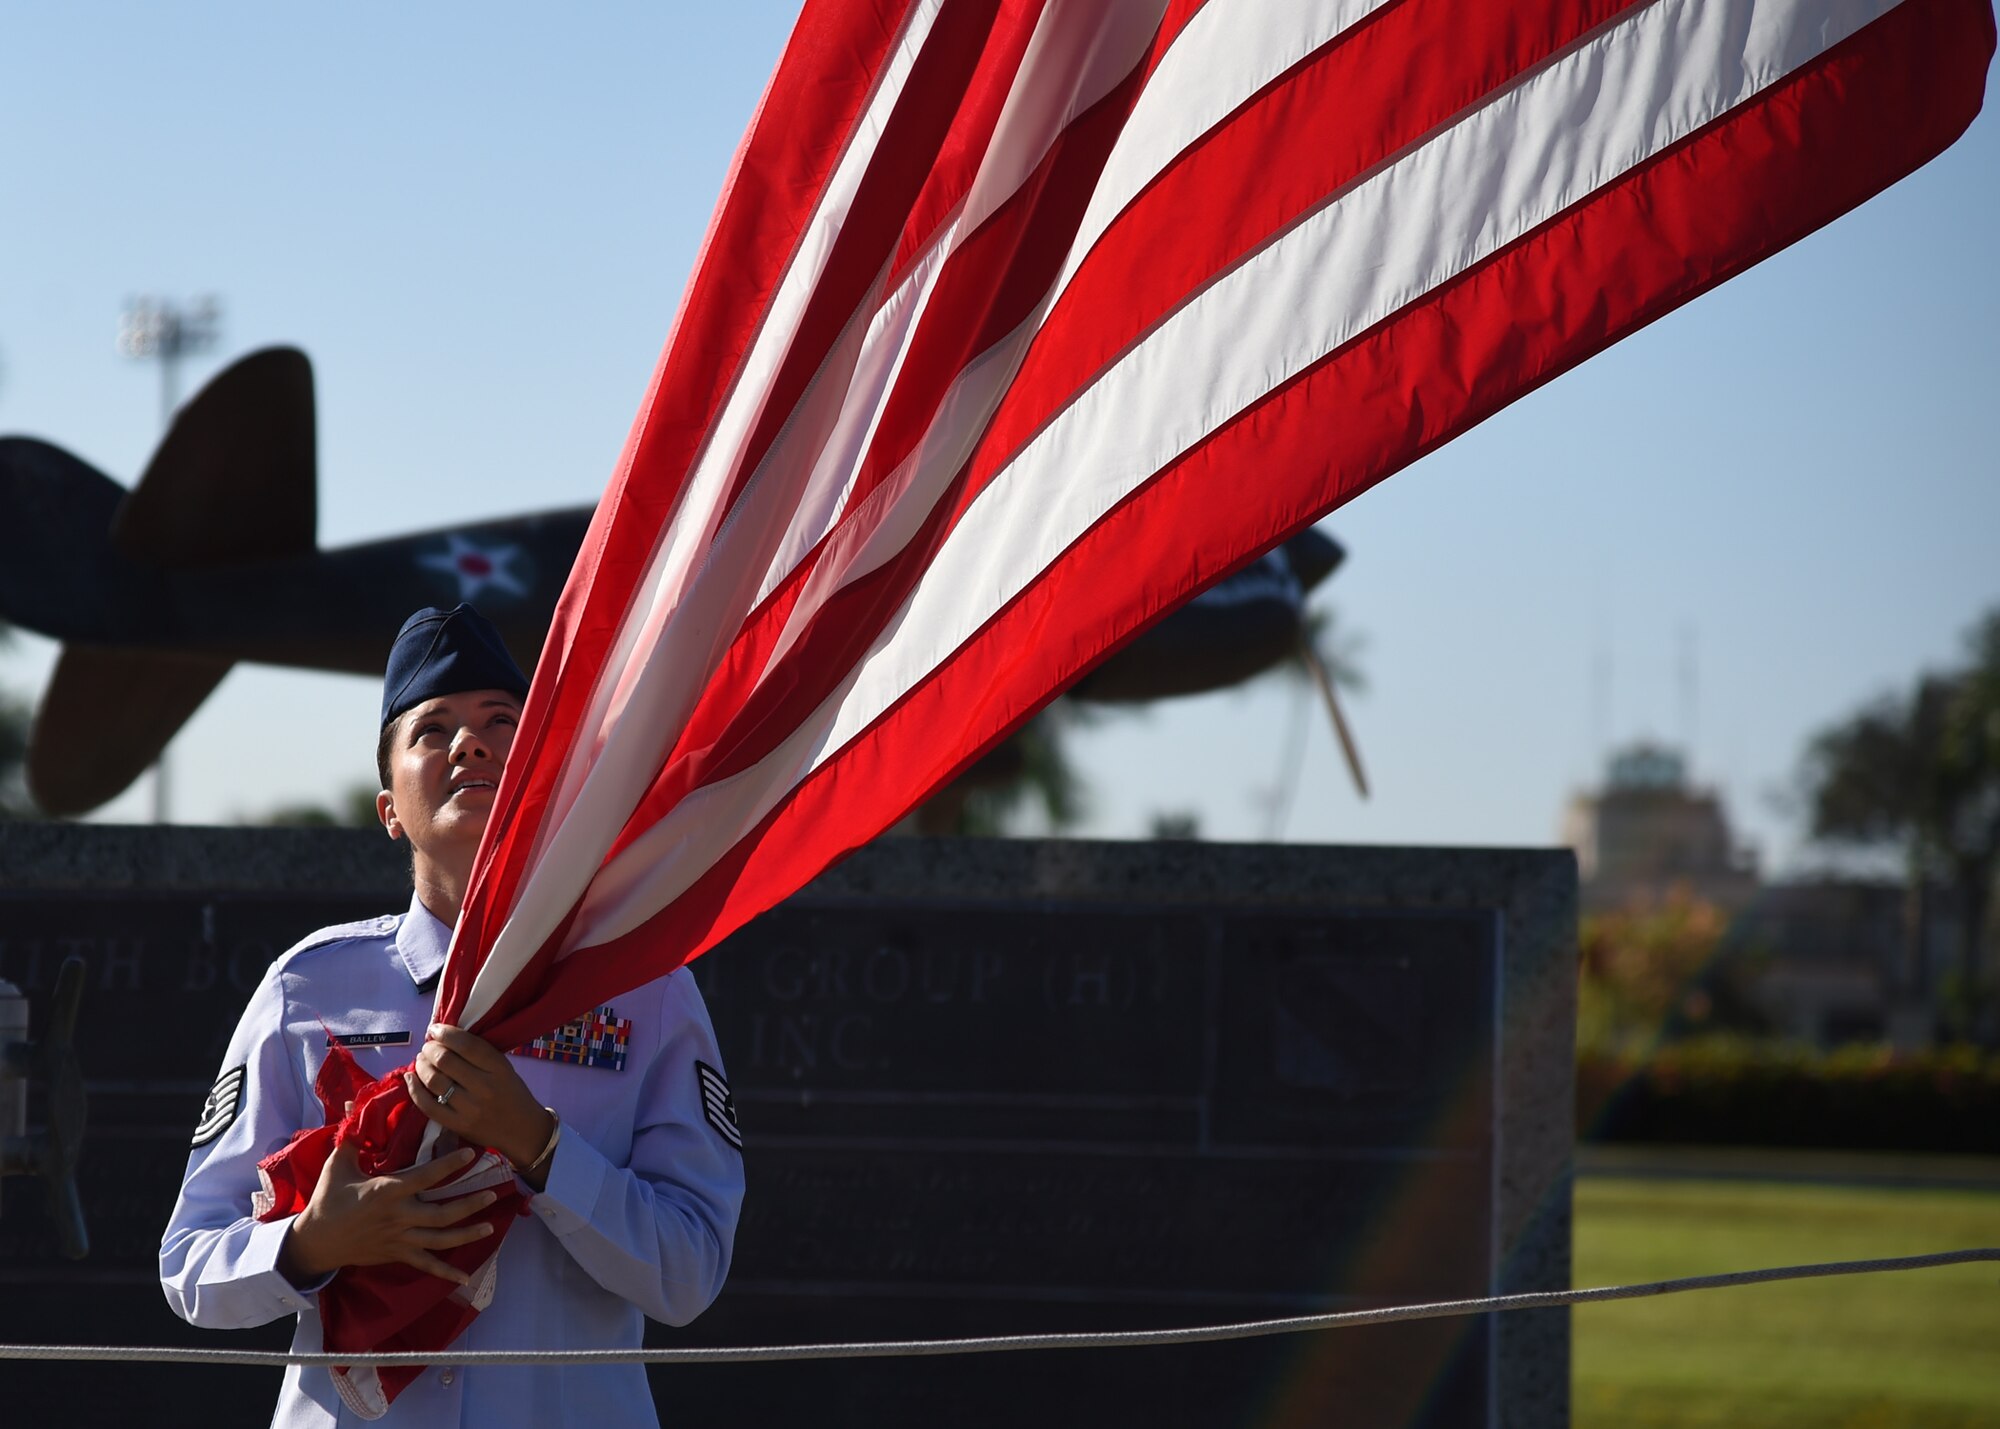 Tech. Sgt. Eloise Ballew, 747th Communications Squadron, secures the U. S. flag prior to Reveille on Joint Base Pearl Harbor-Hickam, Hawaii, July 2, 2015. The ceremony was performed by 60 Airmen from the 747th CS in honor of Independence Day. (U.S. Air Force photo by Tech. Sgt. Aaron Oelrich/Released)  